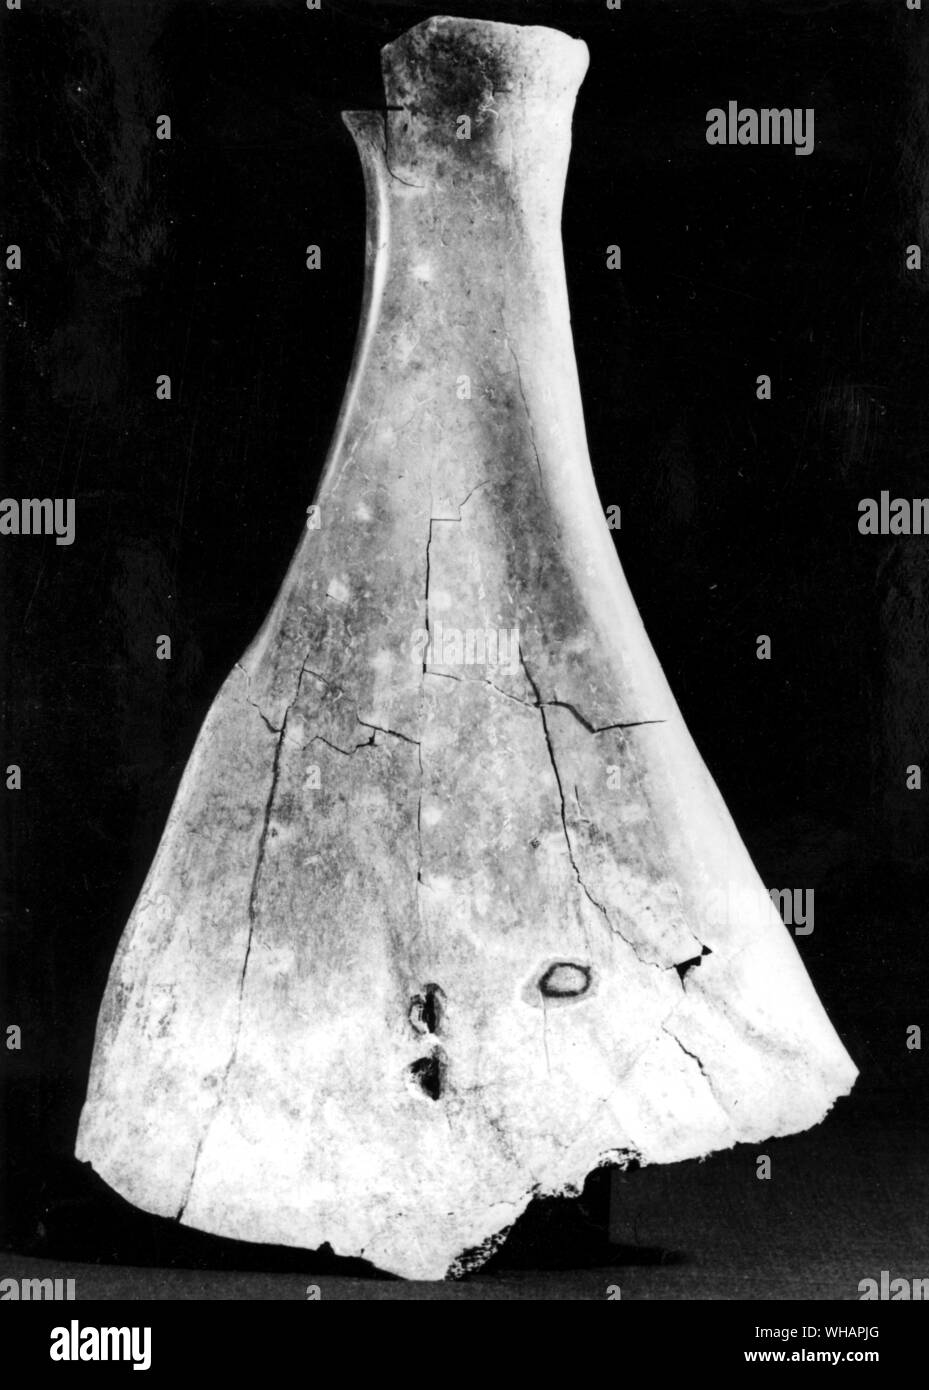 An ox scapula treated for oracle taking, excavated in 1971 at Anyang, Honan. The scapula shows small pits gouged with a chisel to the edge of which a heated bronze point has been applied. From the shape of the forked cracks so caused on the other side of the bone answers were read to the questions which are inscribed. Among the cracks a characteristic line with a short spur gave the shape for the ideograph pu 'to take an oracle'. The inscribed sentences the proper choice of animal victims for sacrifice to ancestors denoted by the number of a day (their offering day) in the ten day cycle. The Stock Photo